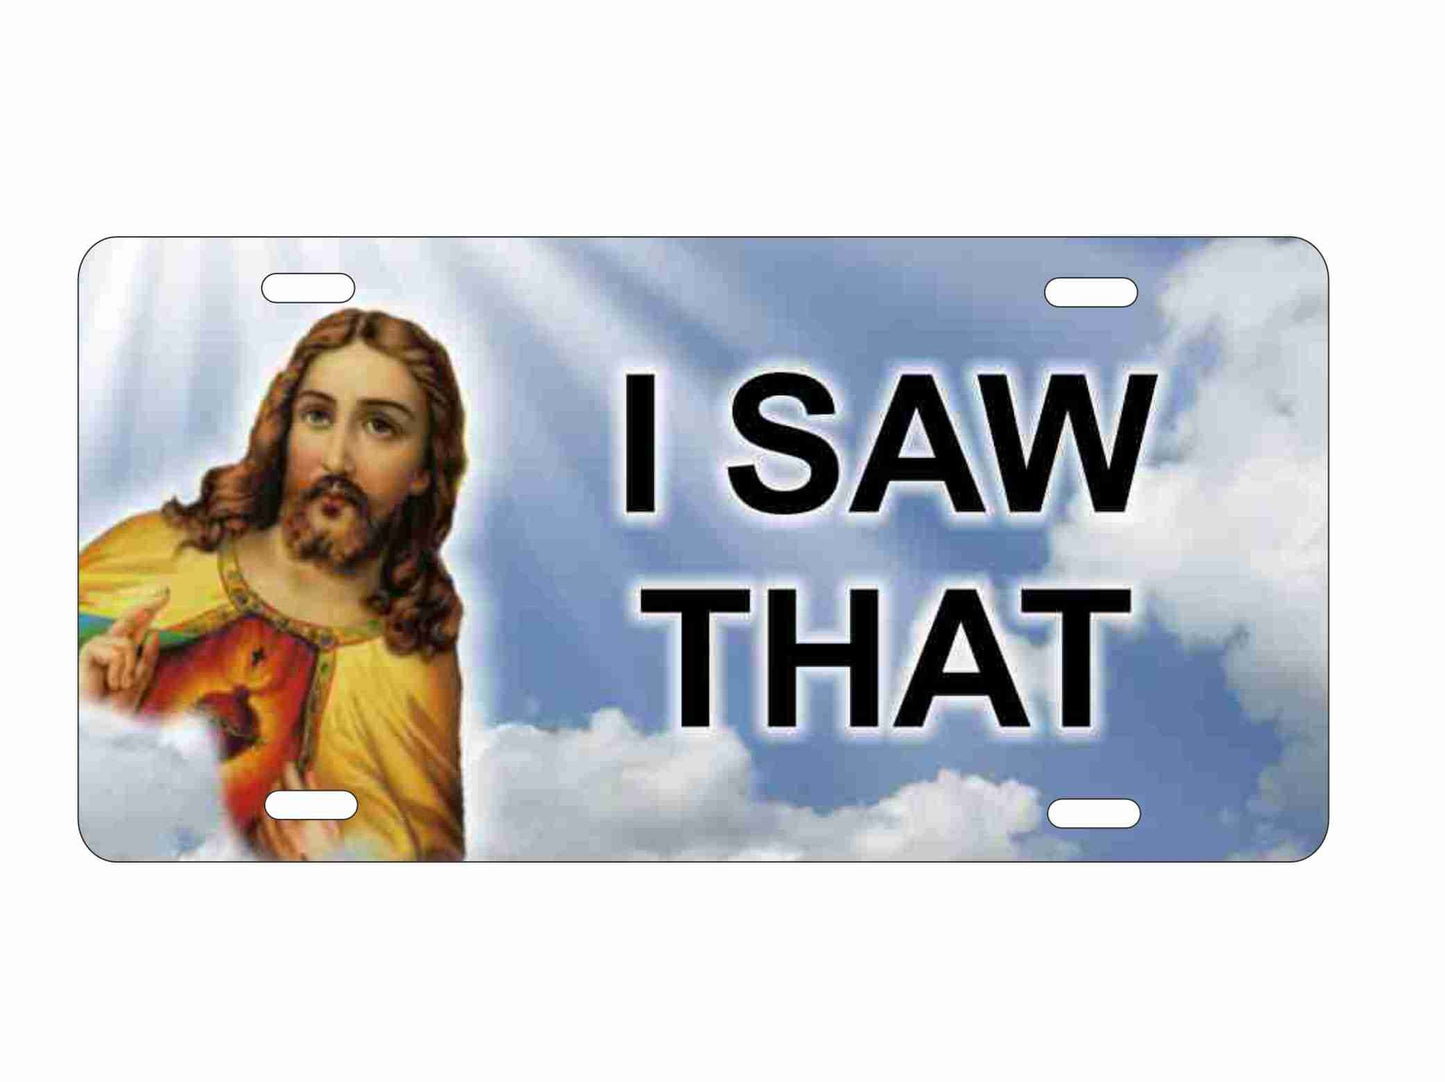 Jesus I saw that novelty front license plate Christian vanity decorative Aluminum car tag